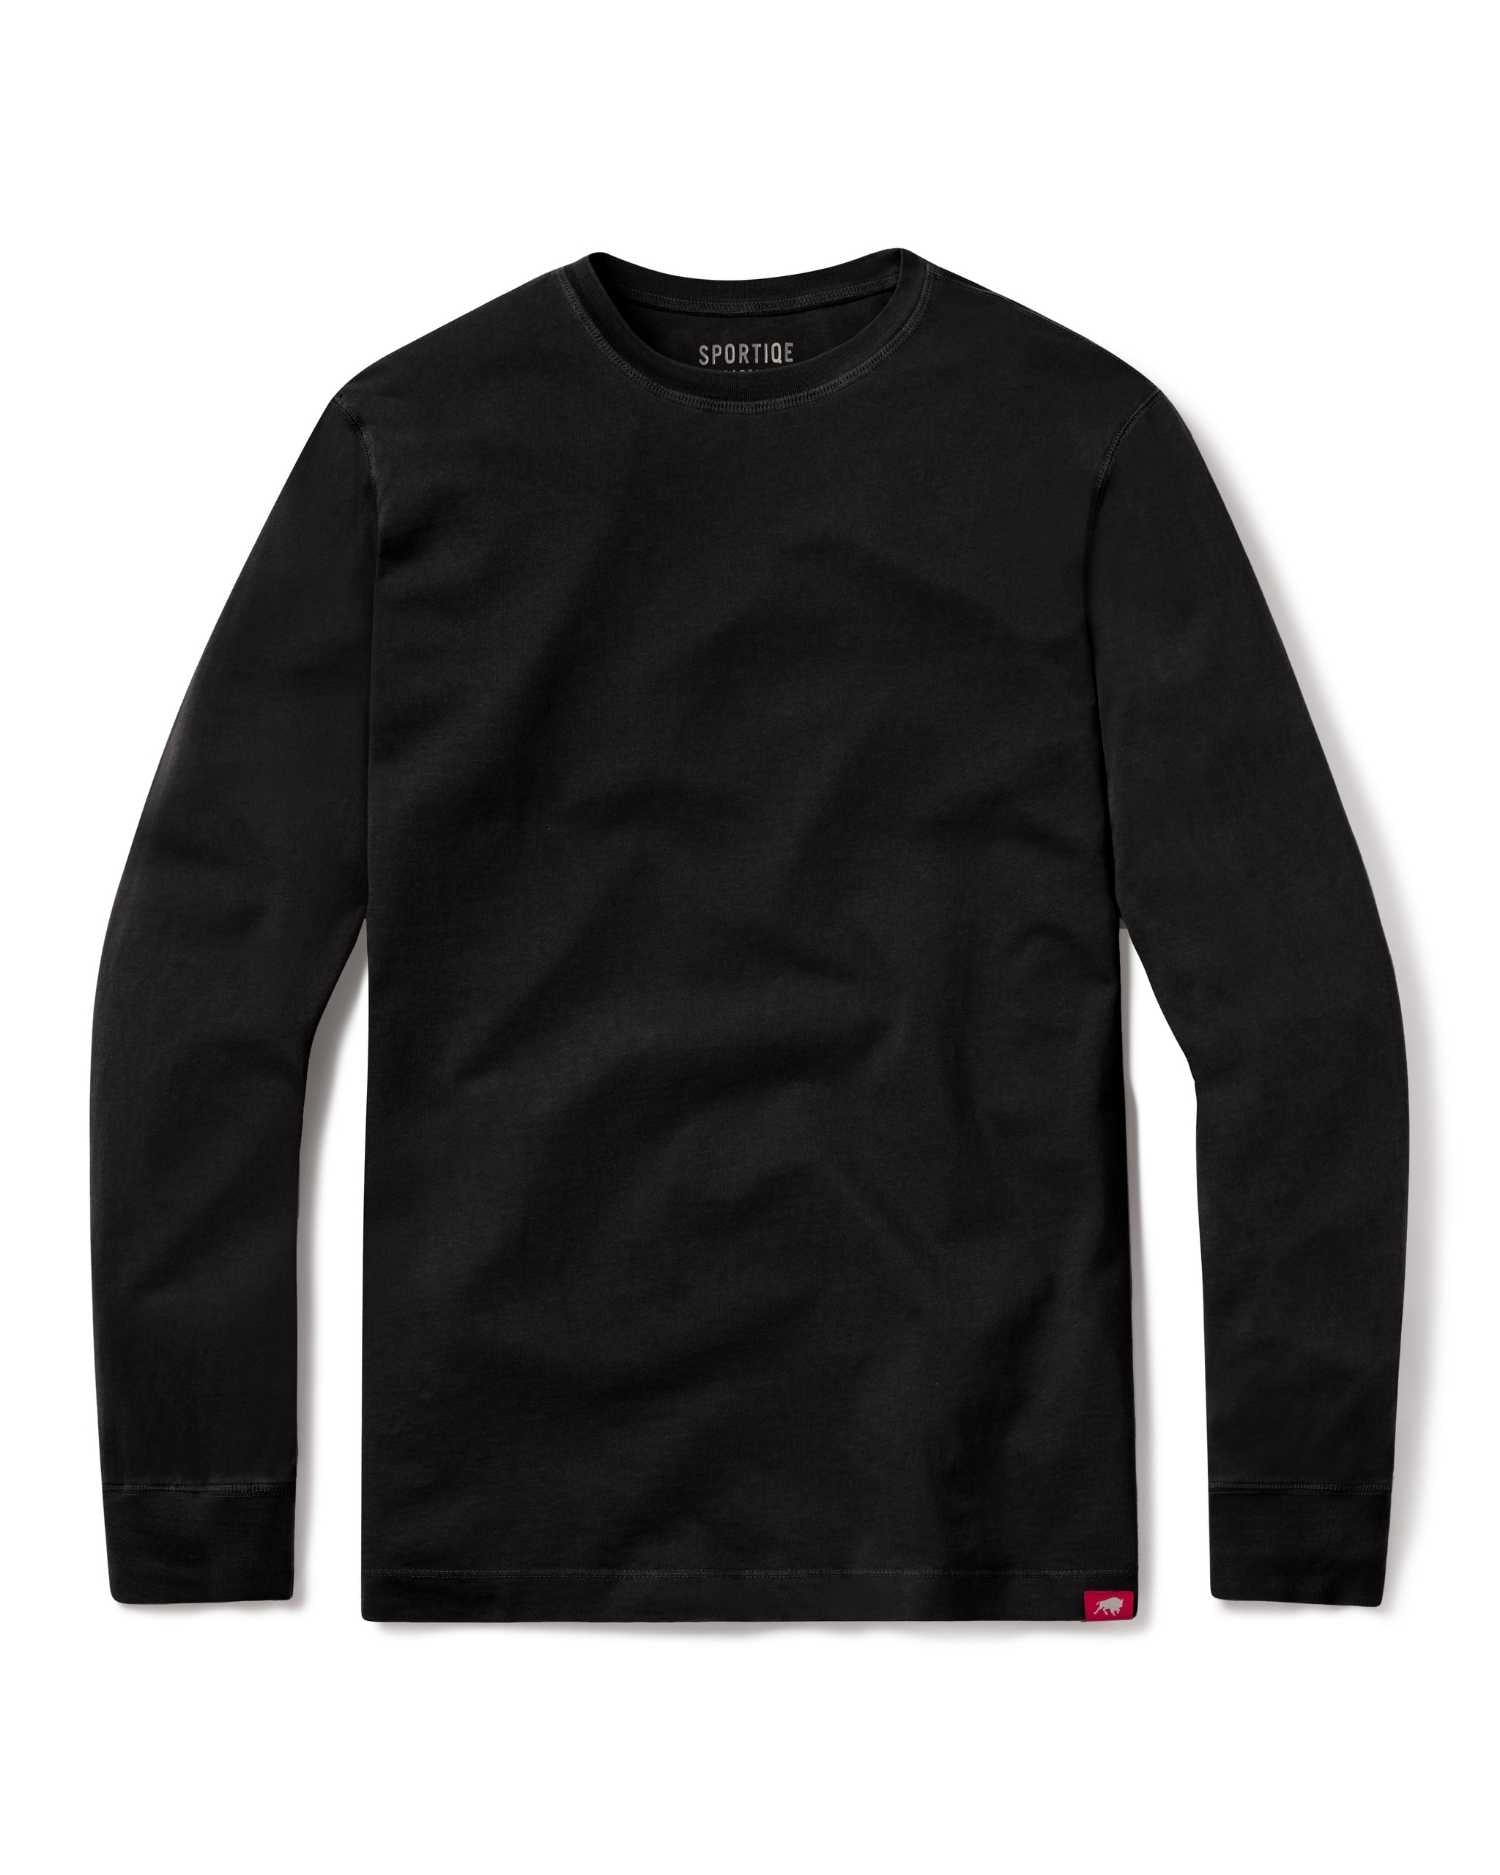 Mohave Long Sleeve Tee - Sportiqe Apparel